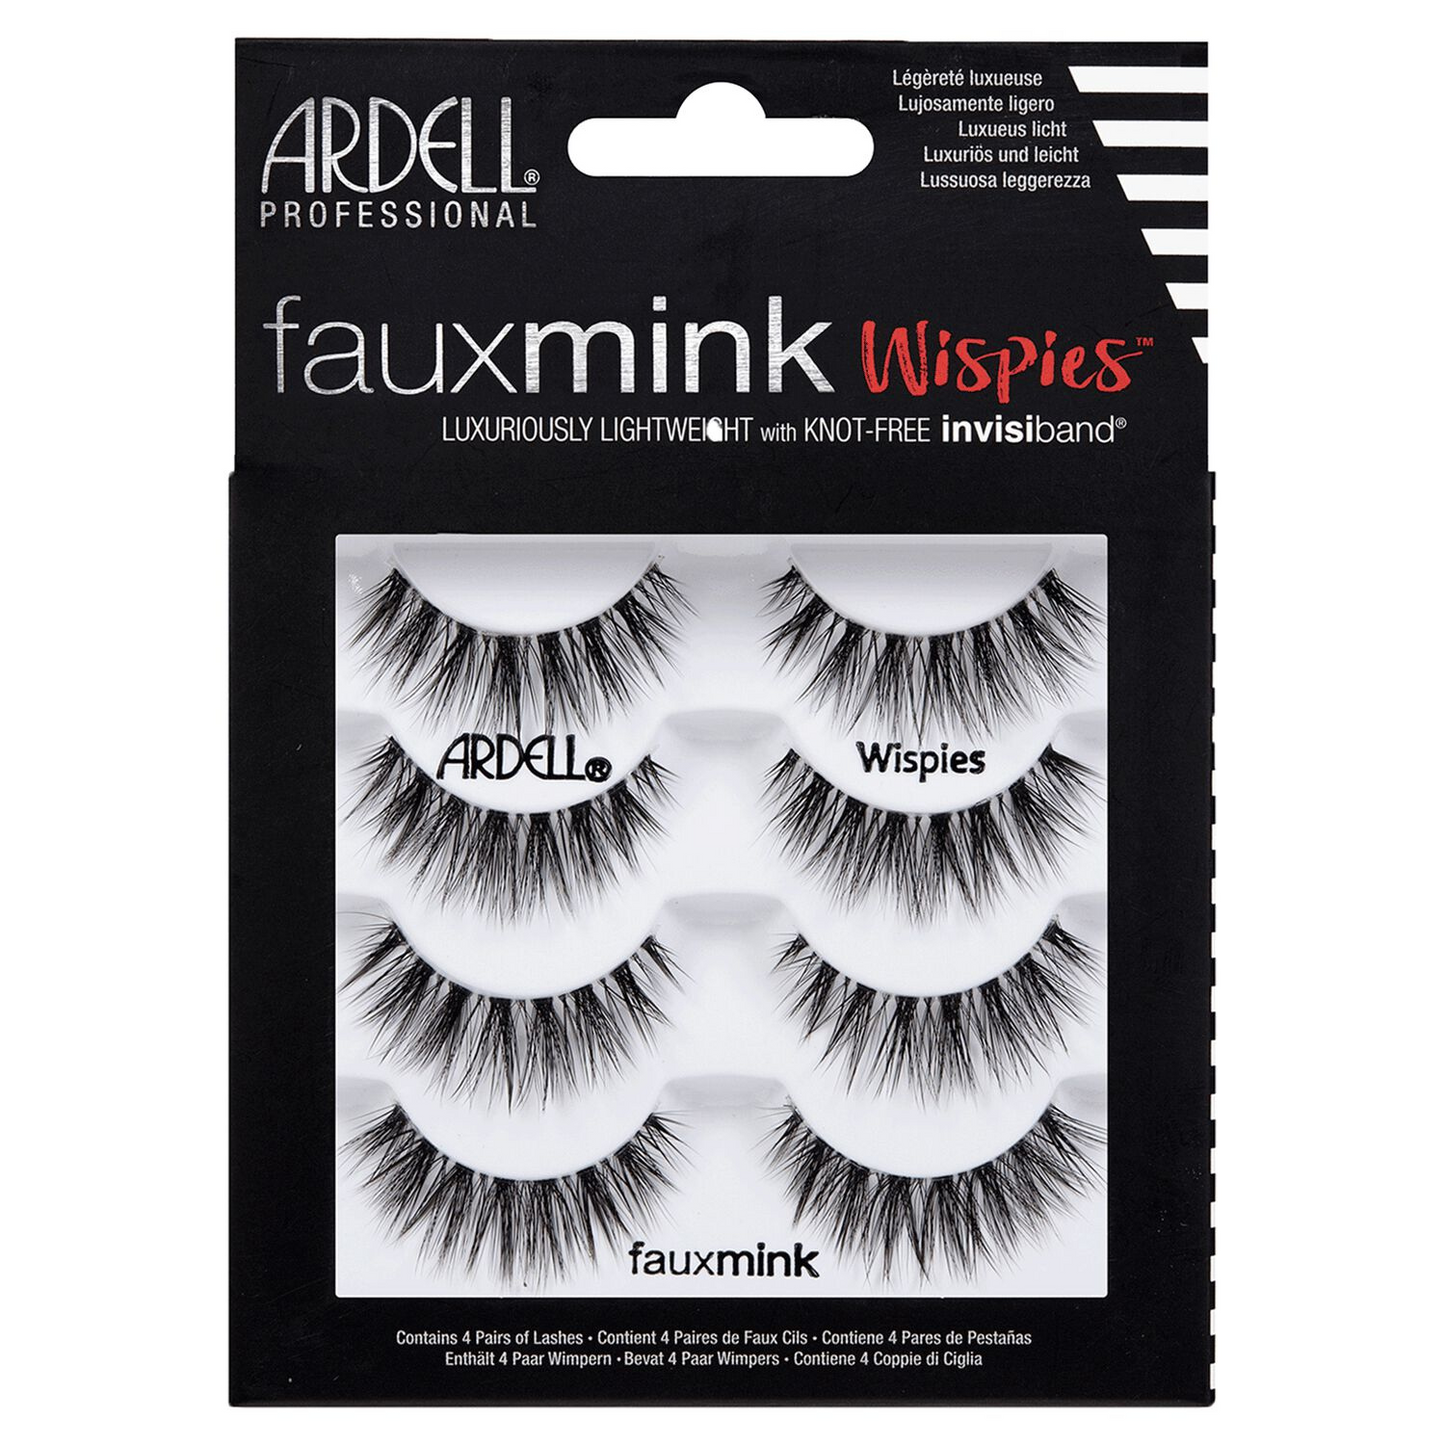 Ardell Professional - Faux Mink Lashes Wispies - 4 Pack